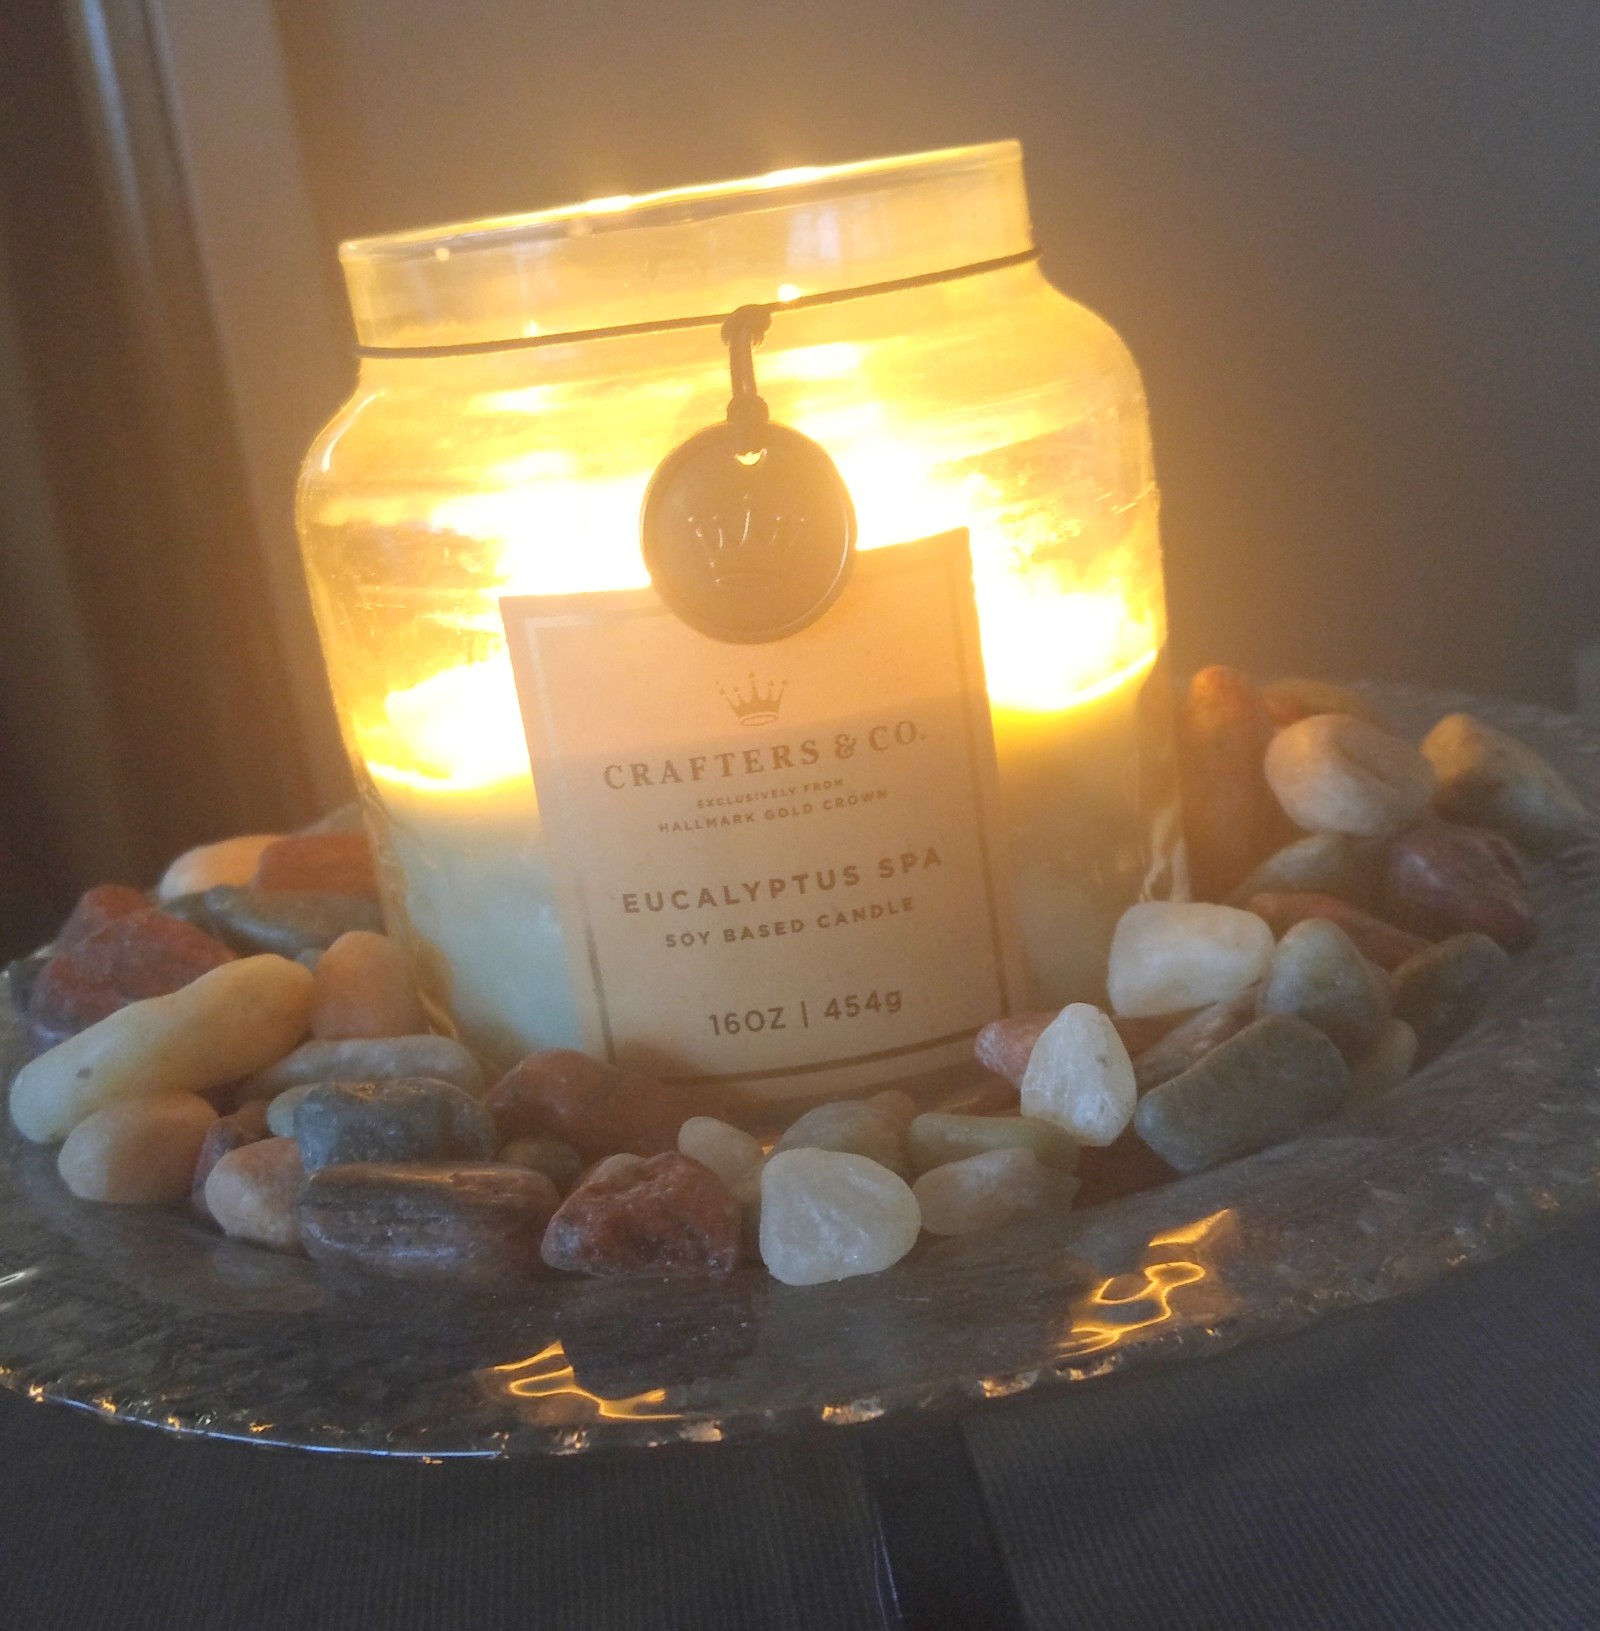 Hallmark Gold Crown Crafters Co Candle Review